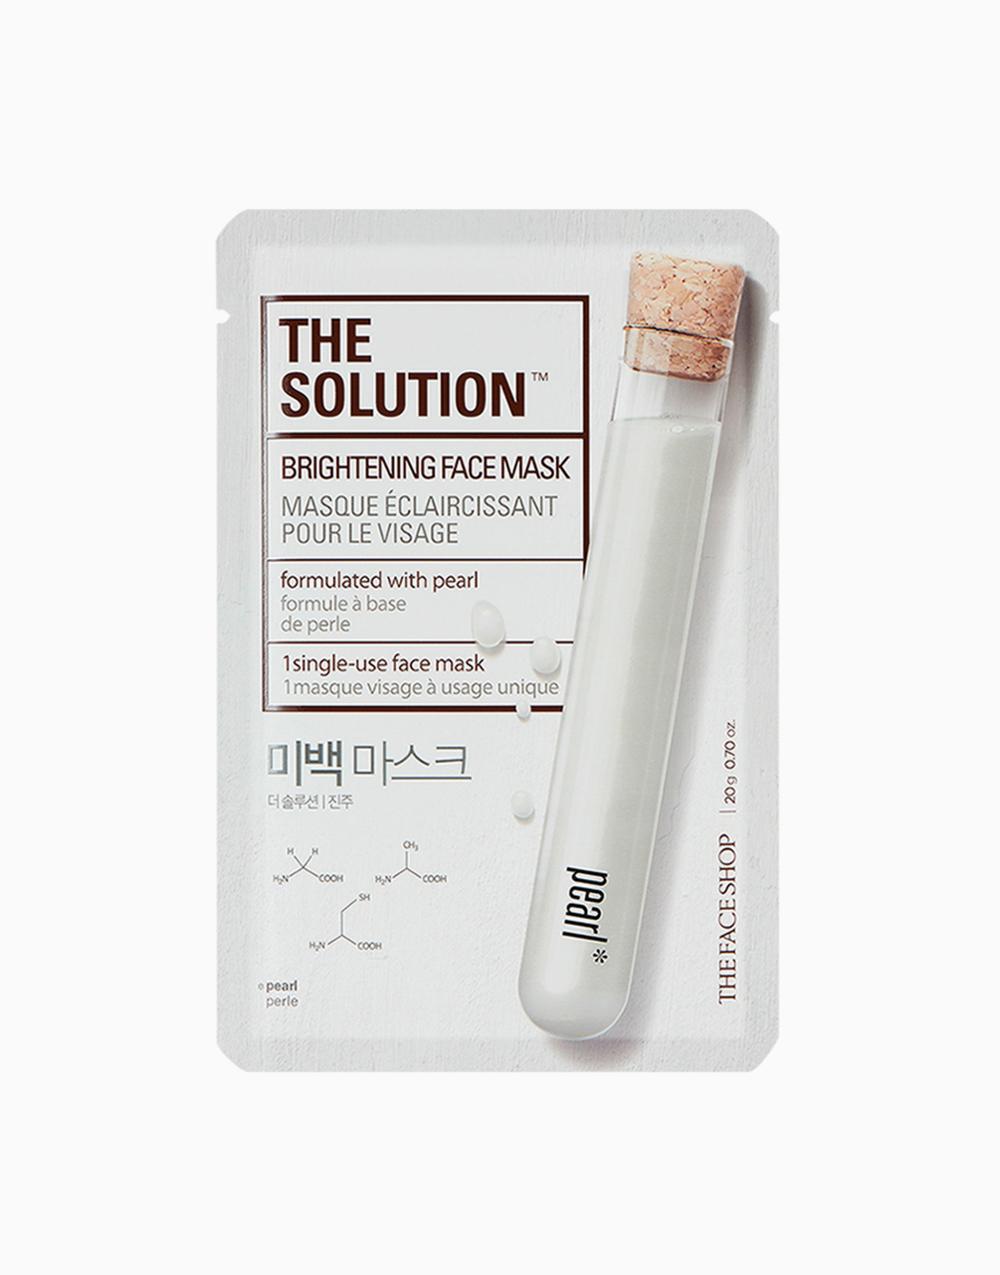 The Solution Brightening Face Mask